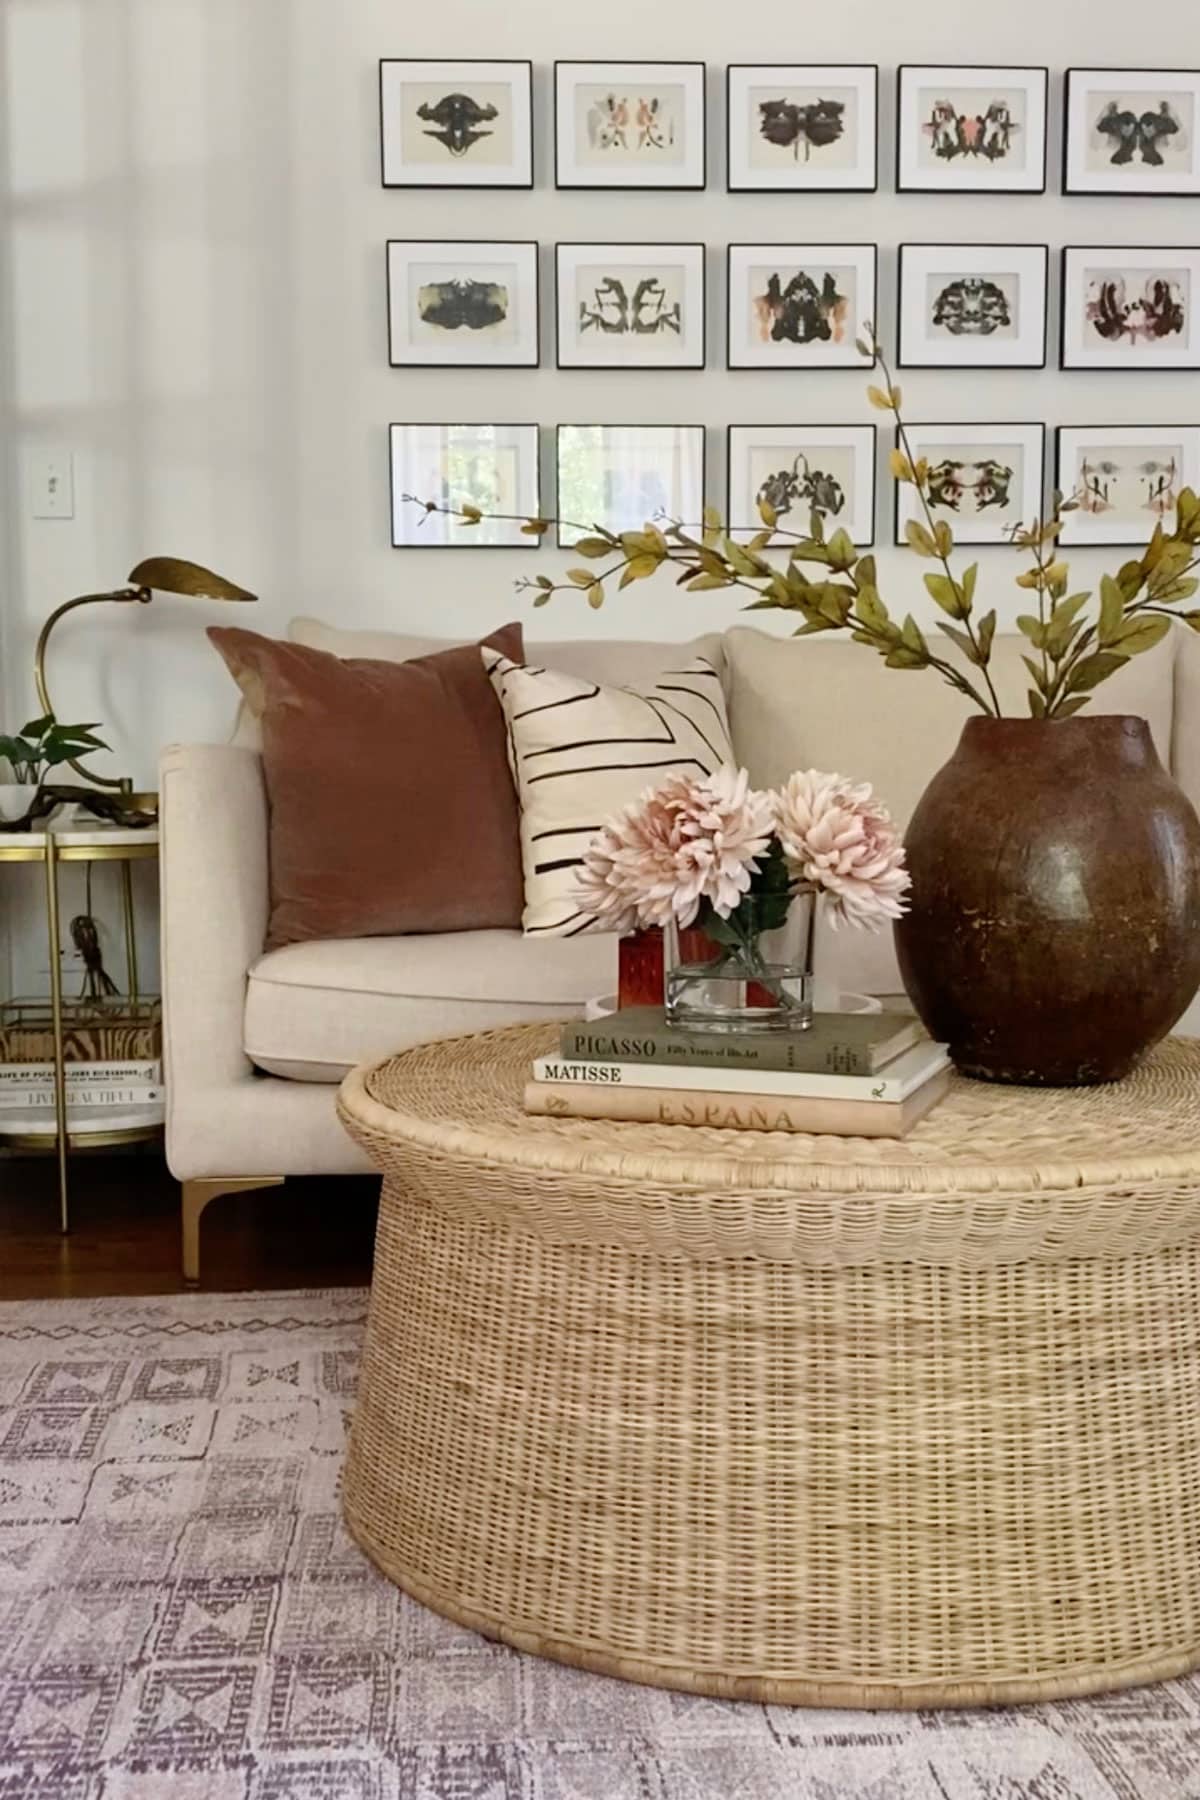 5 tips Coffee Table Decor Ideas - Learn these 5 design tips to styling perfect coffee table decor